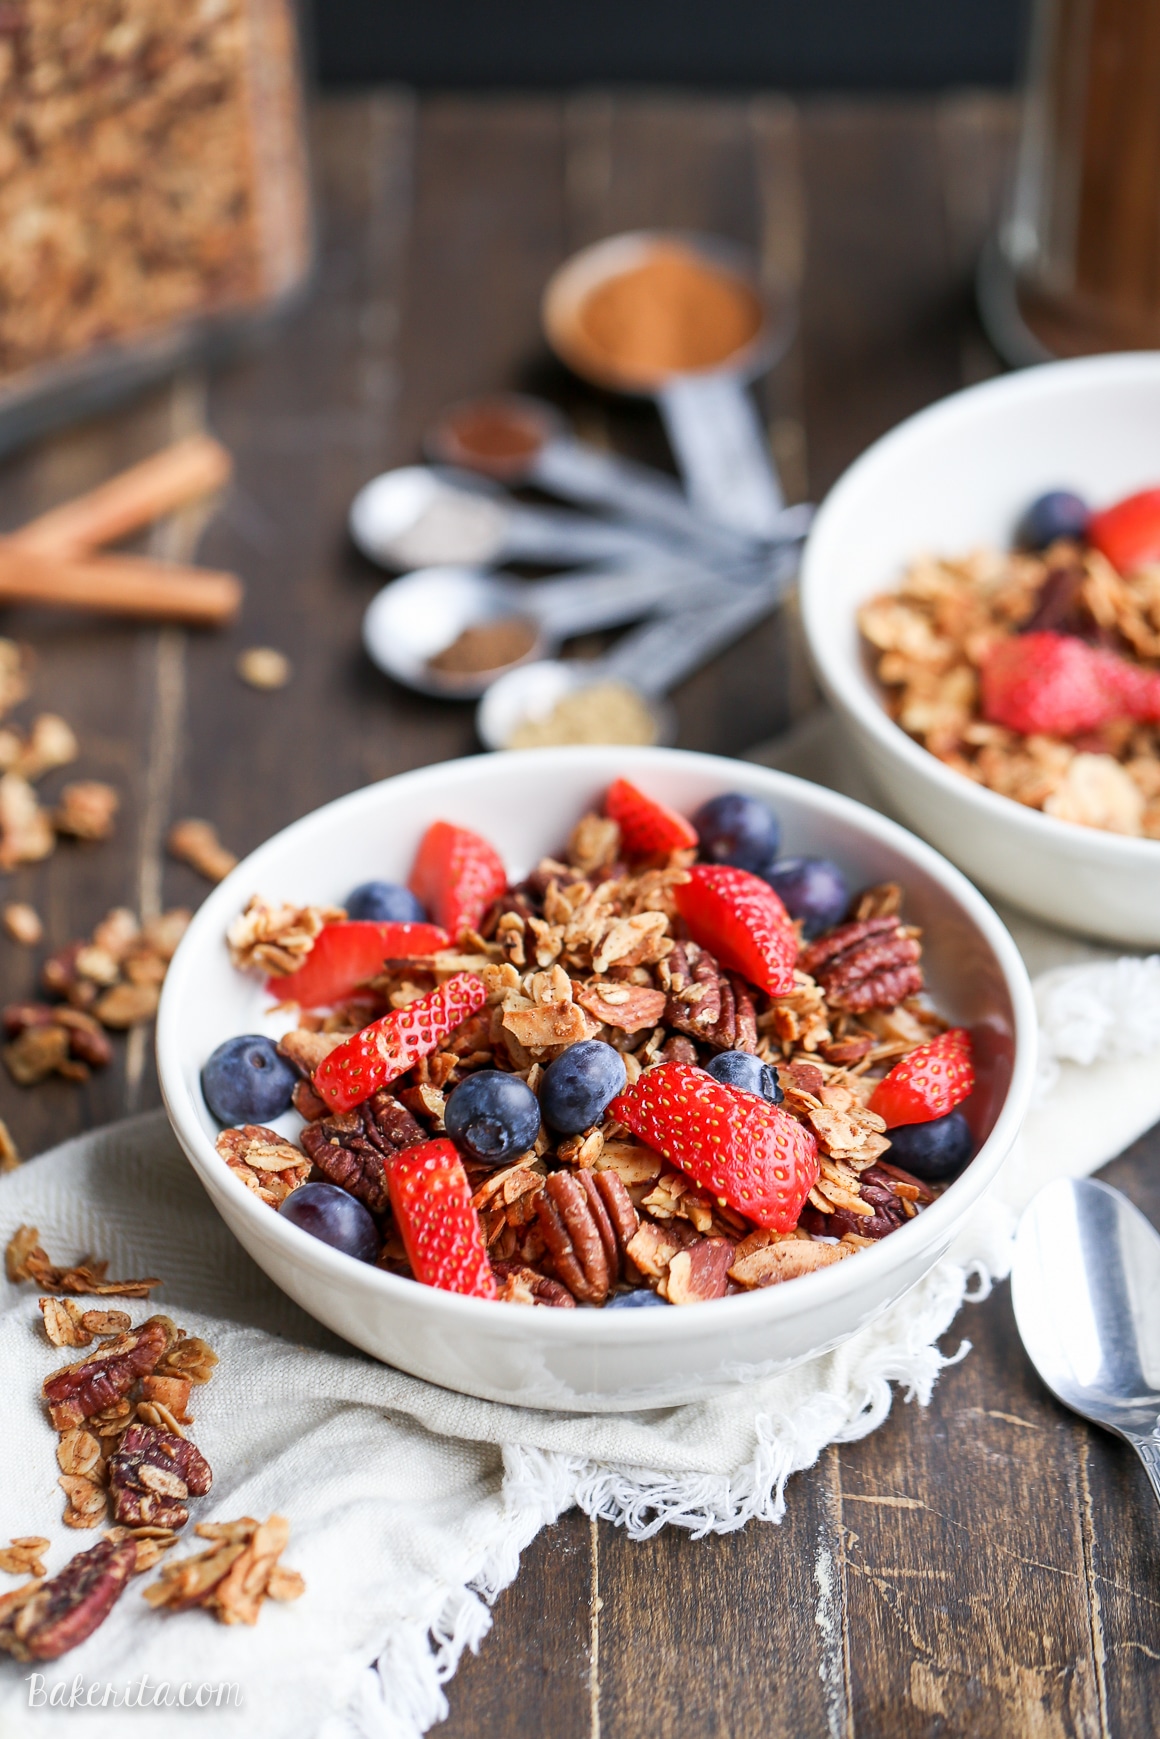 This Chai Spice Granola is a simple granola recipe, bursting with chai spice flavor. It's gluten-free, vegan, and makes the perfect breakfast or snack.